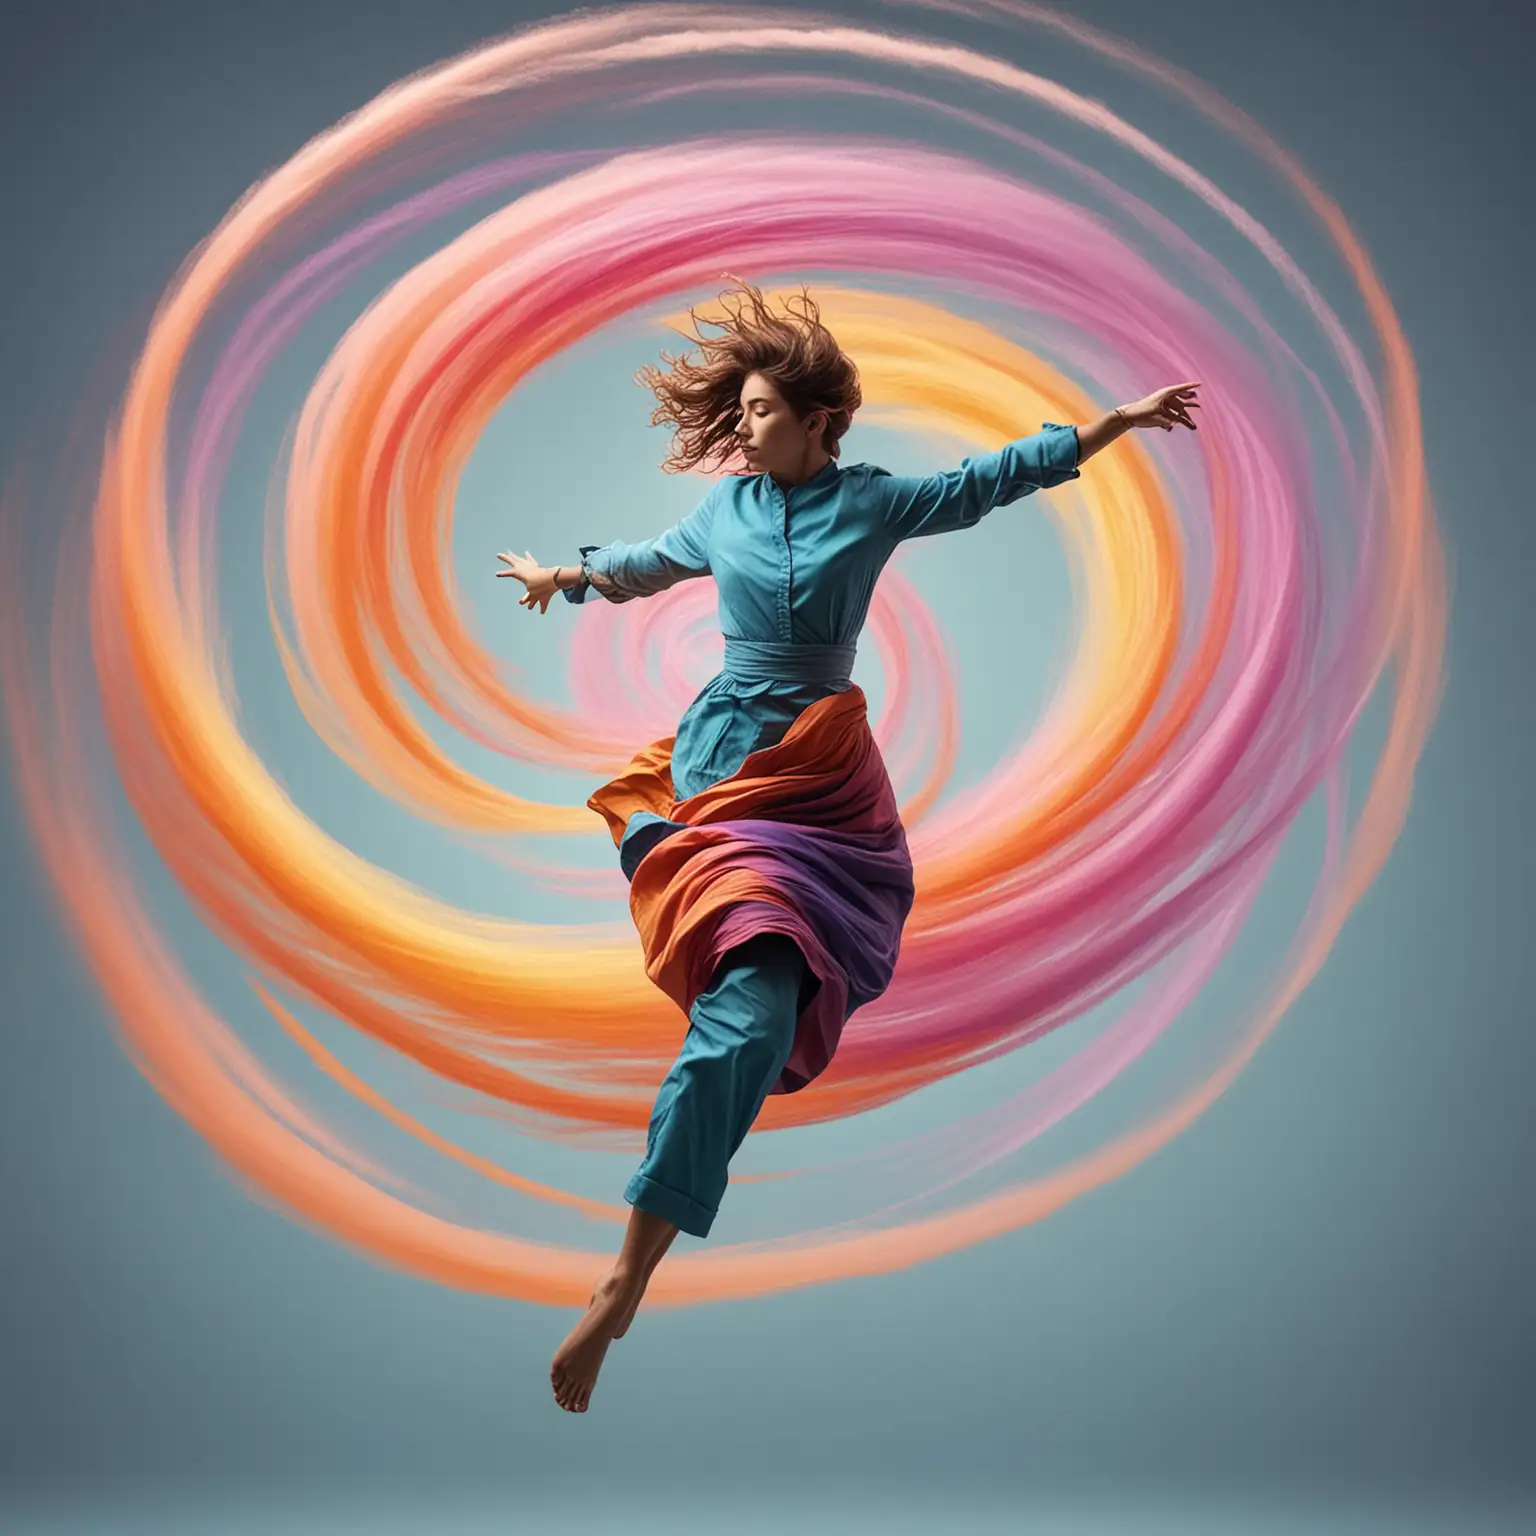 A colorful picture of a person twisting through the air.
